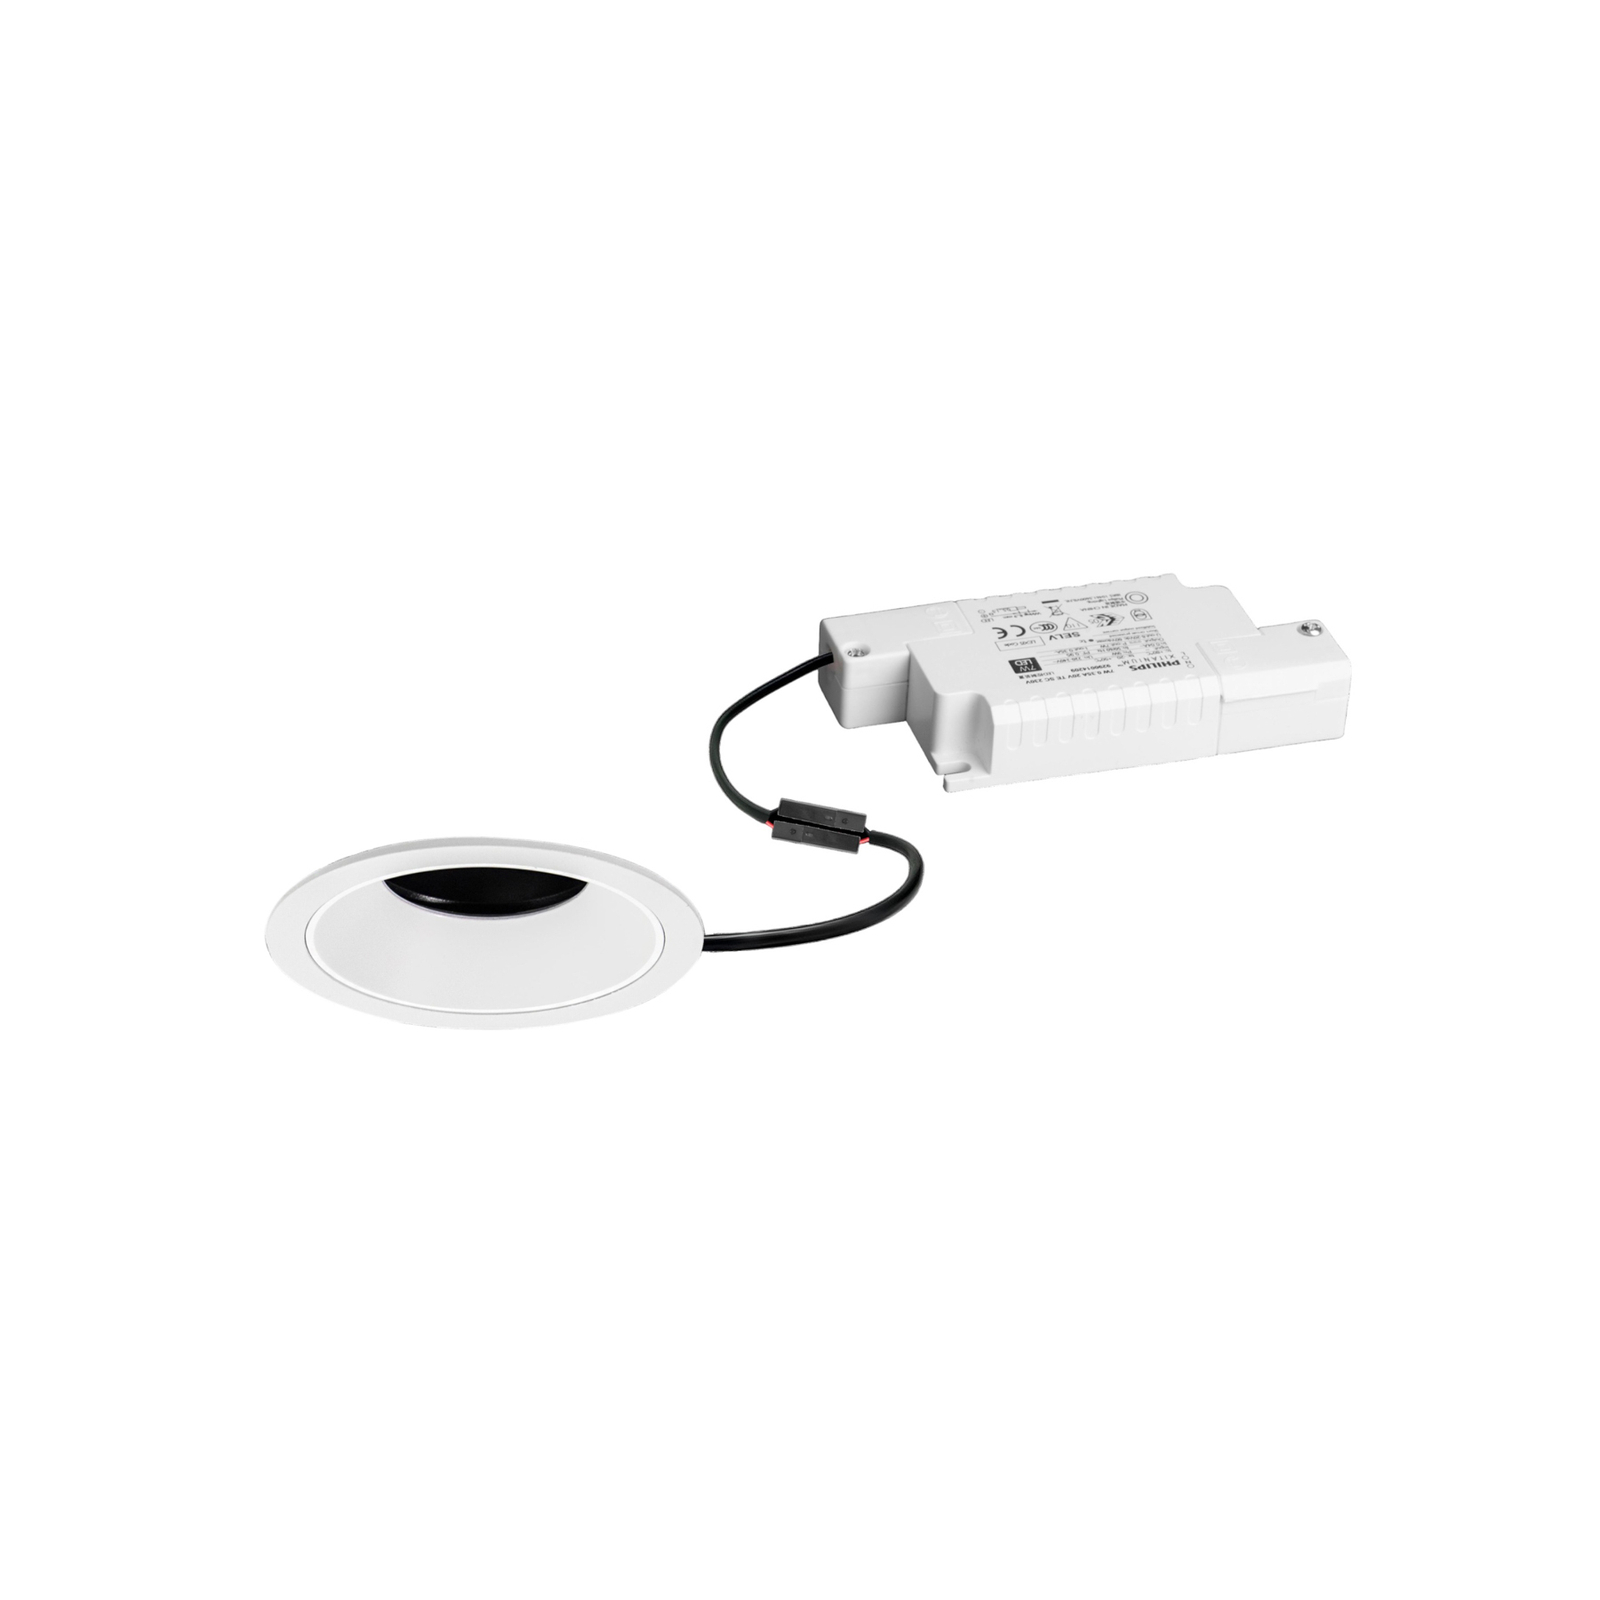 BRUMBERG LED recessed downlight Binato RC-dimmable 2700K white